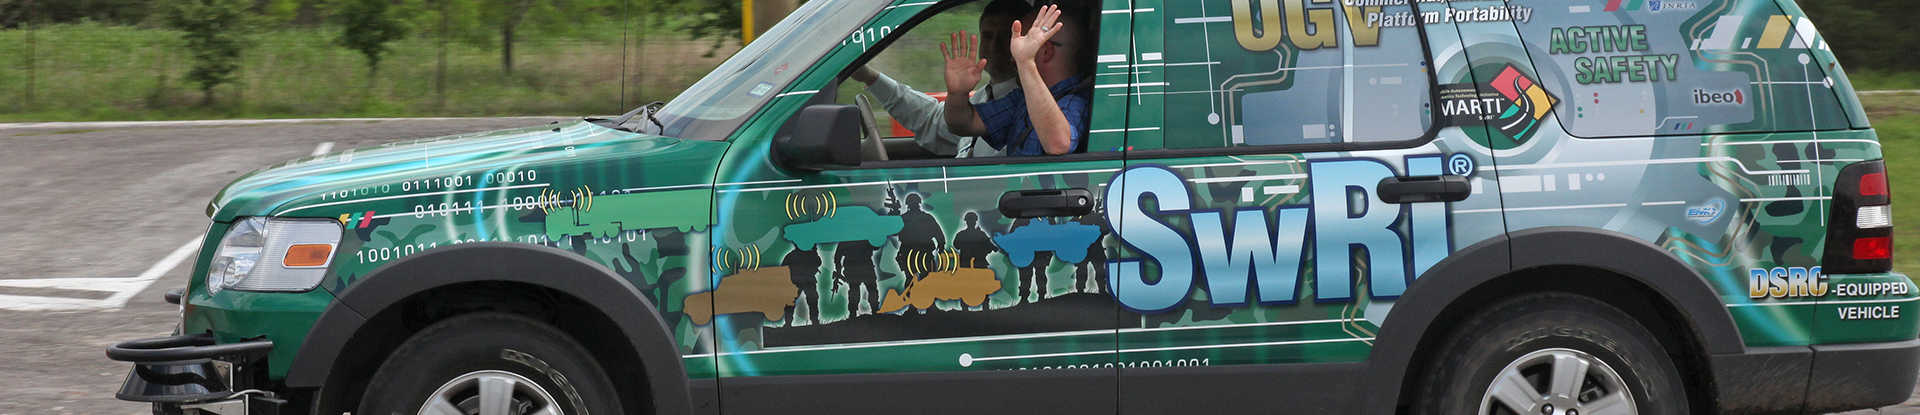 Driver with hand off steering wheel of SUV covered in vinyl graphics